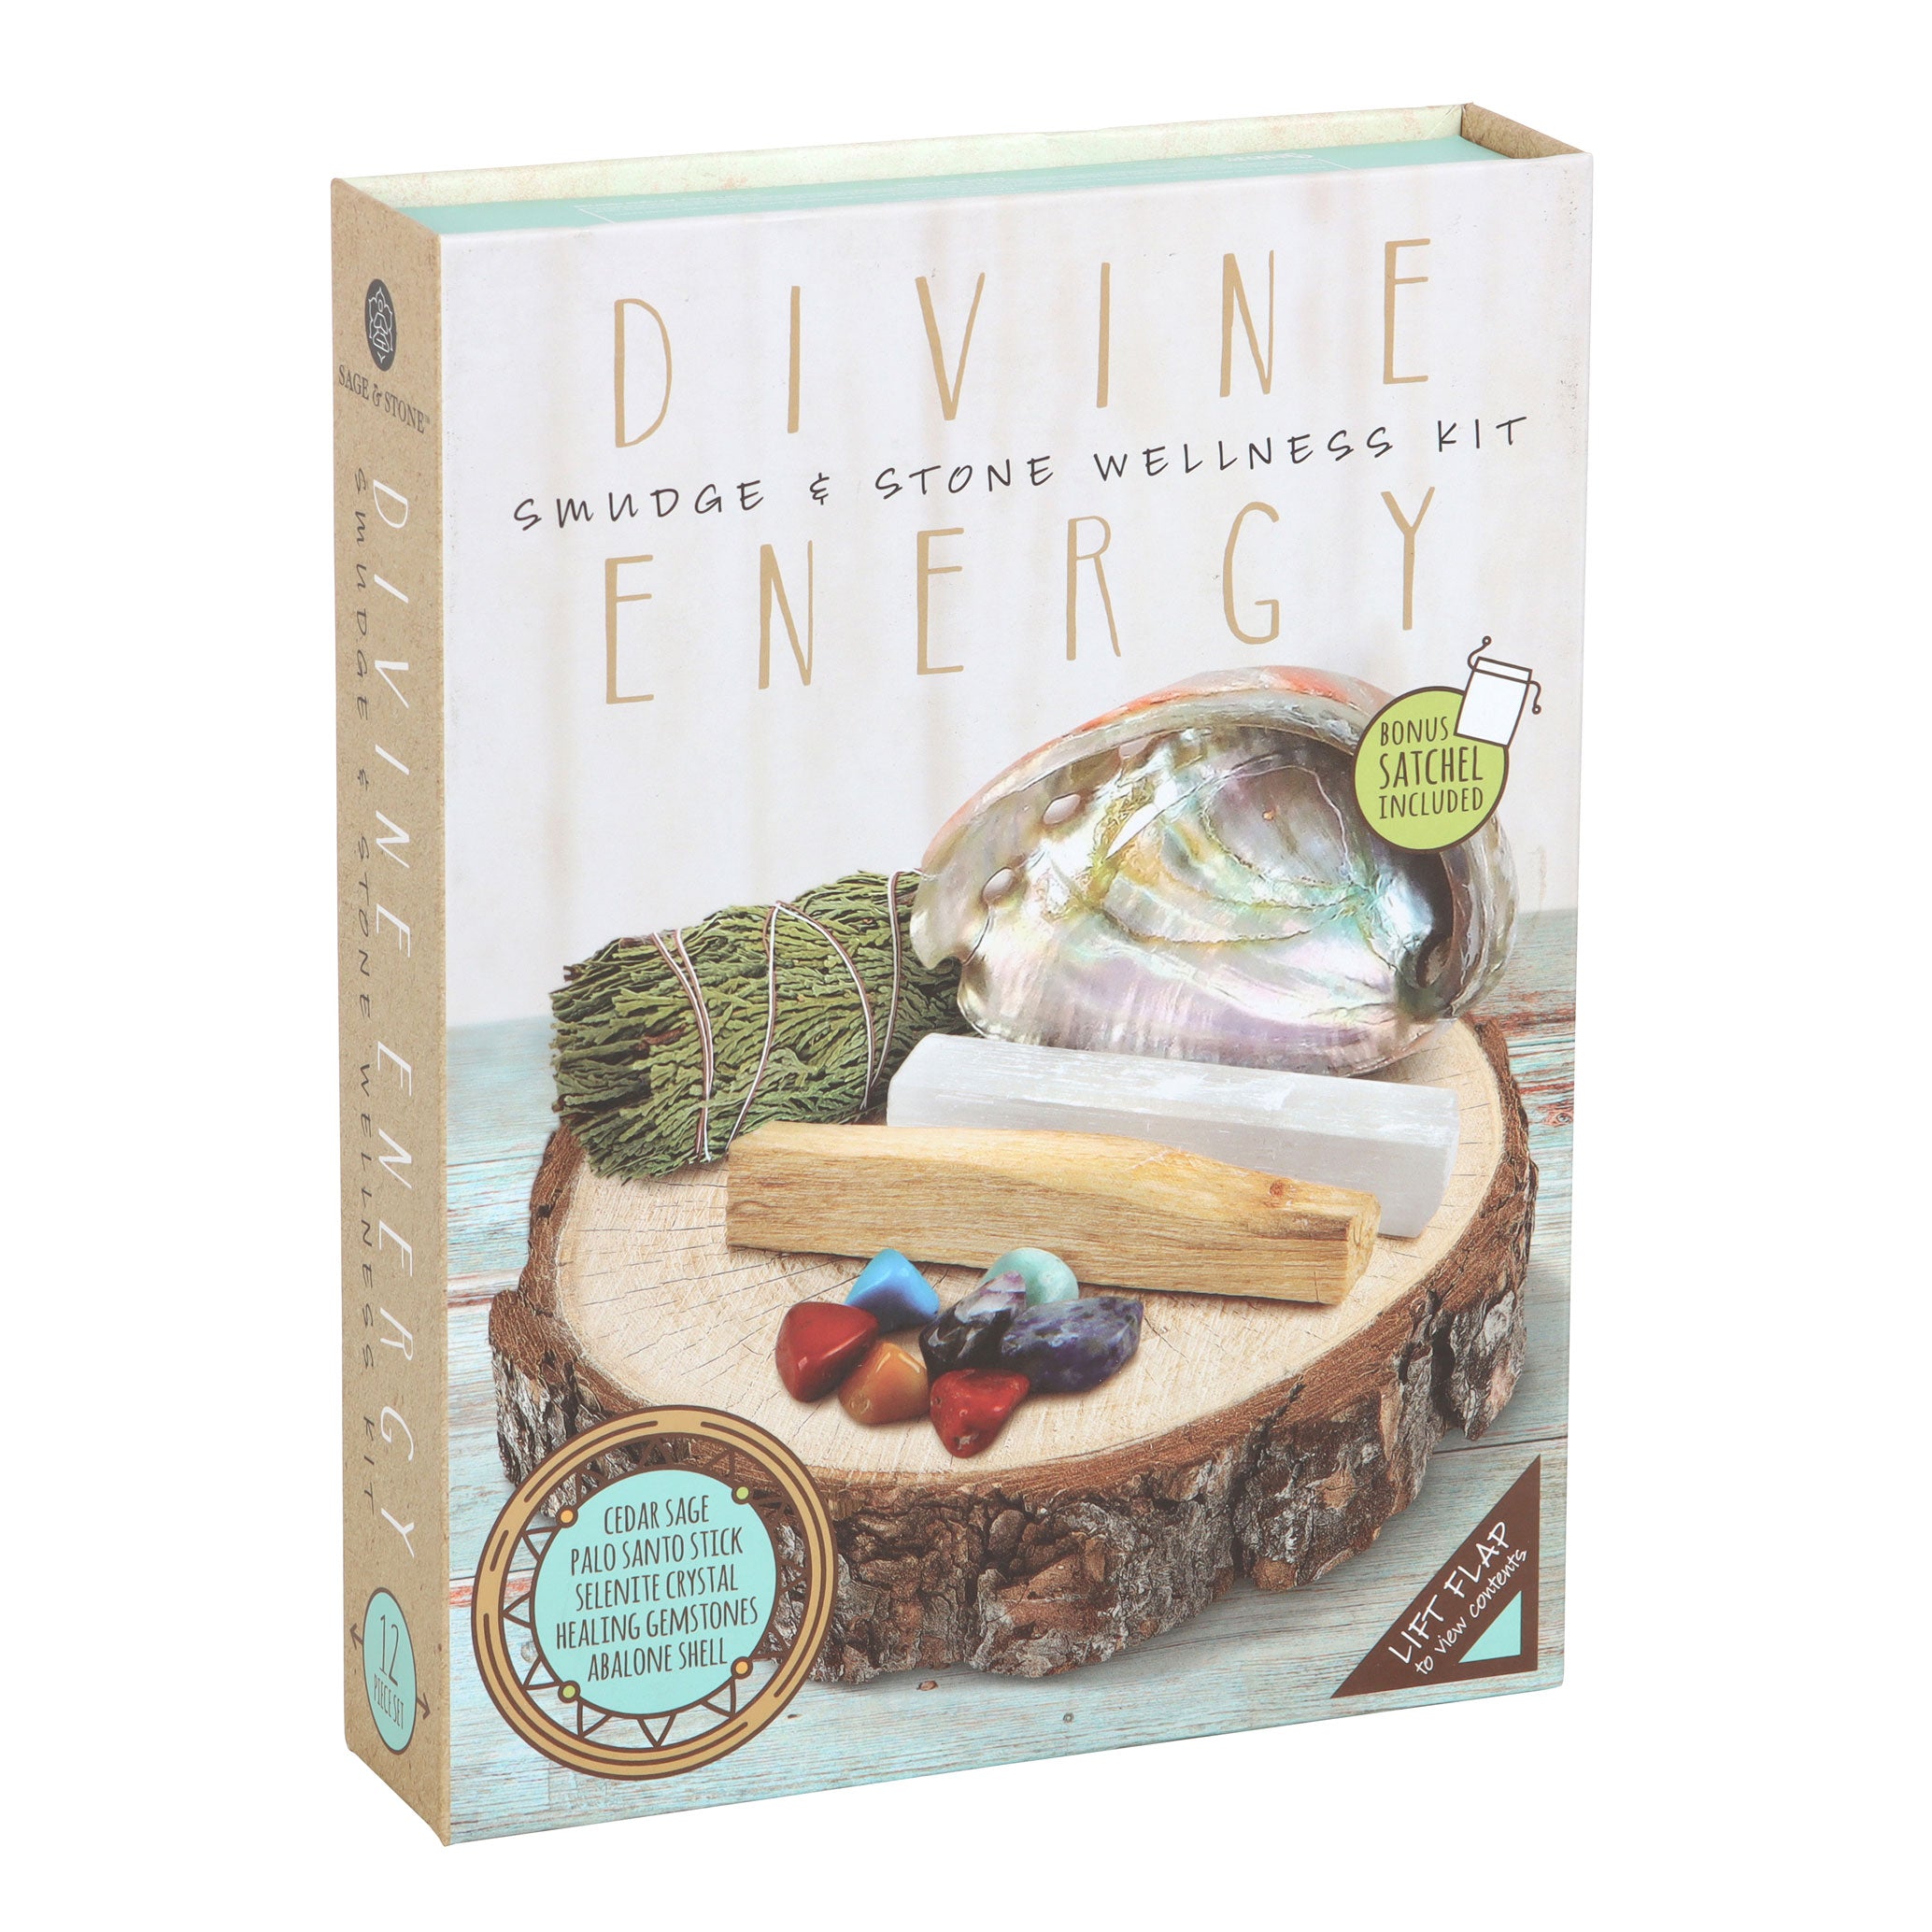 View Divine Energy Smudge and Stone Wellness Kit information